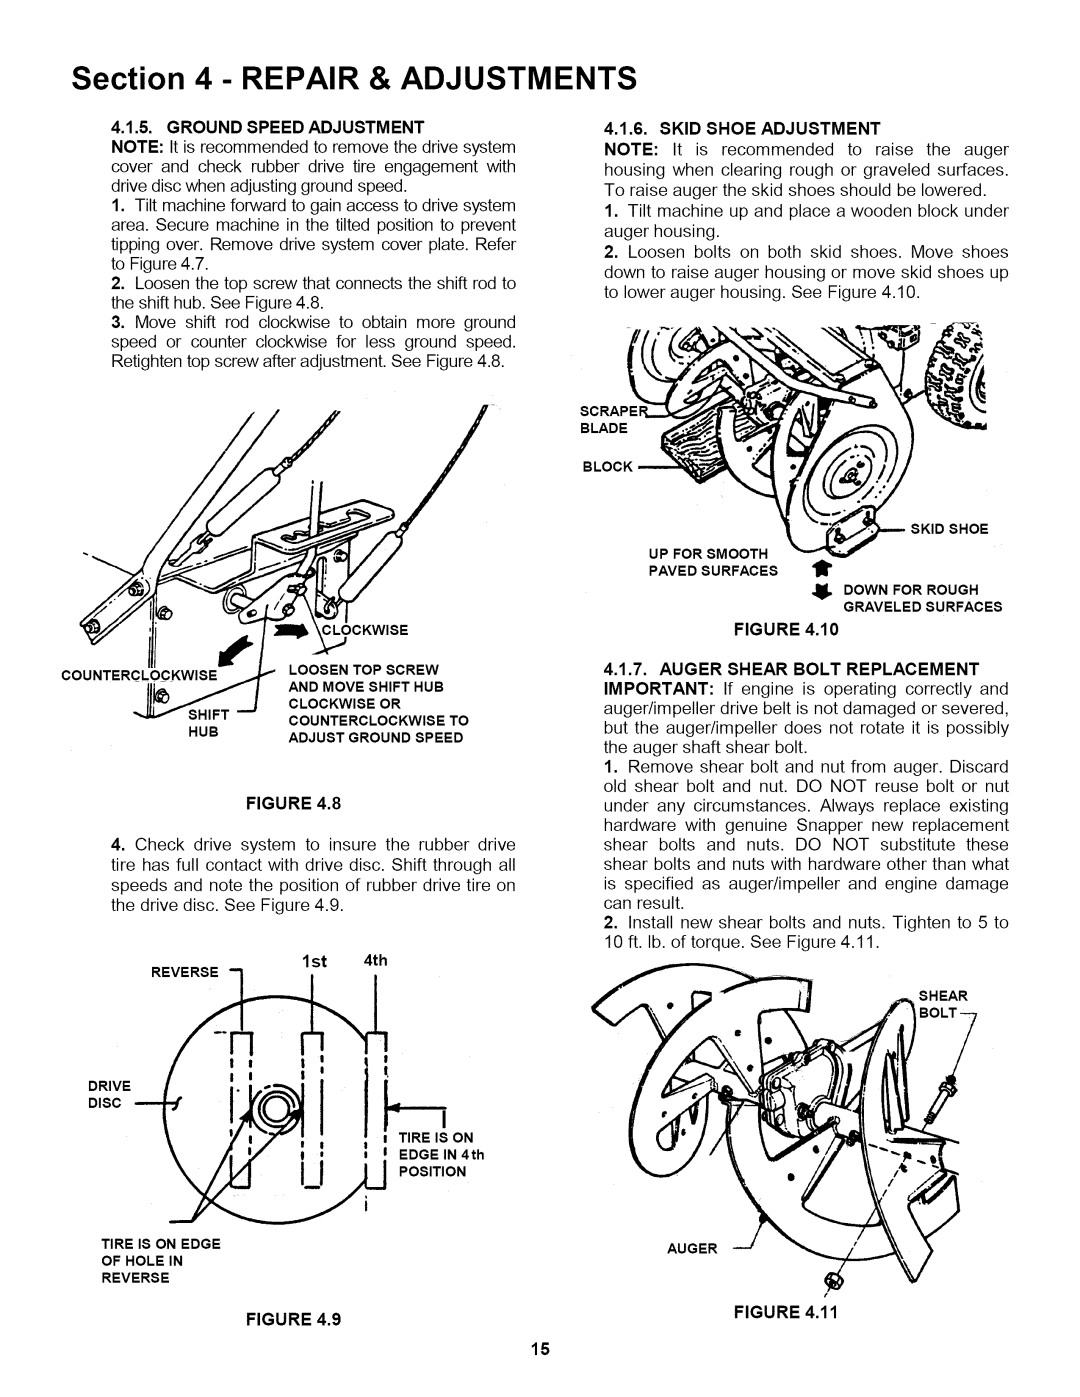 Snapper 155223 important safety instructions Repair & Adjustments, Ground Speed Adjustment, 1st 4th, Skid Shoe Adjustment 